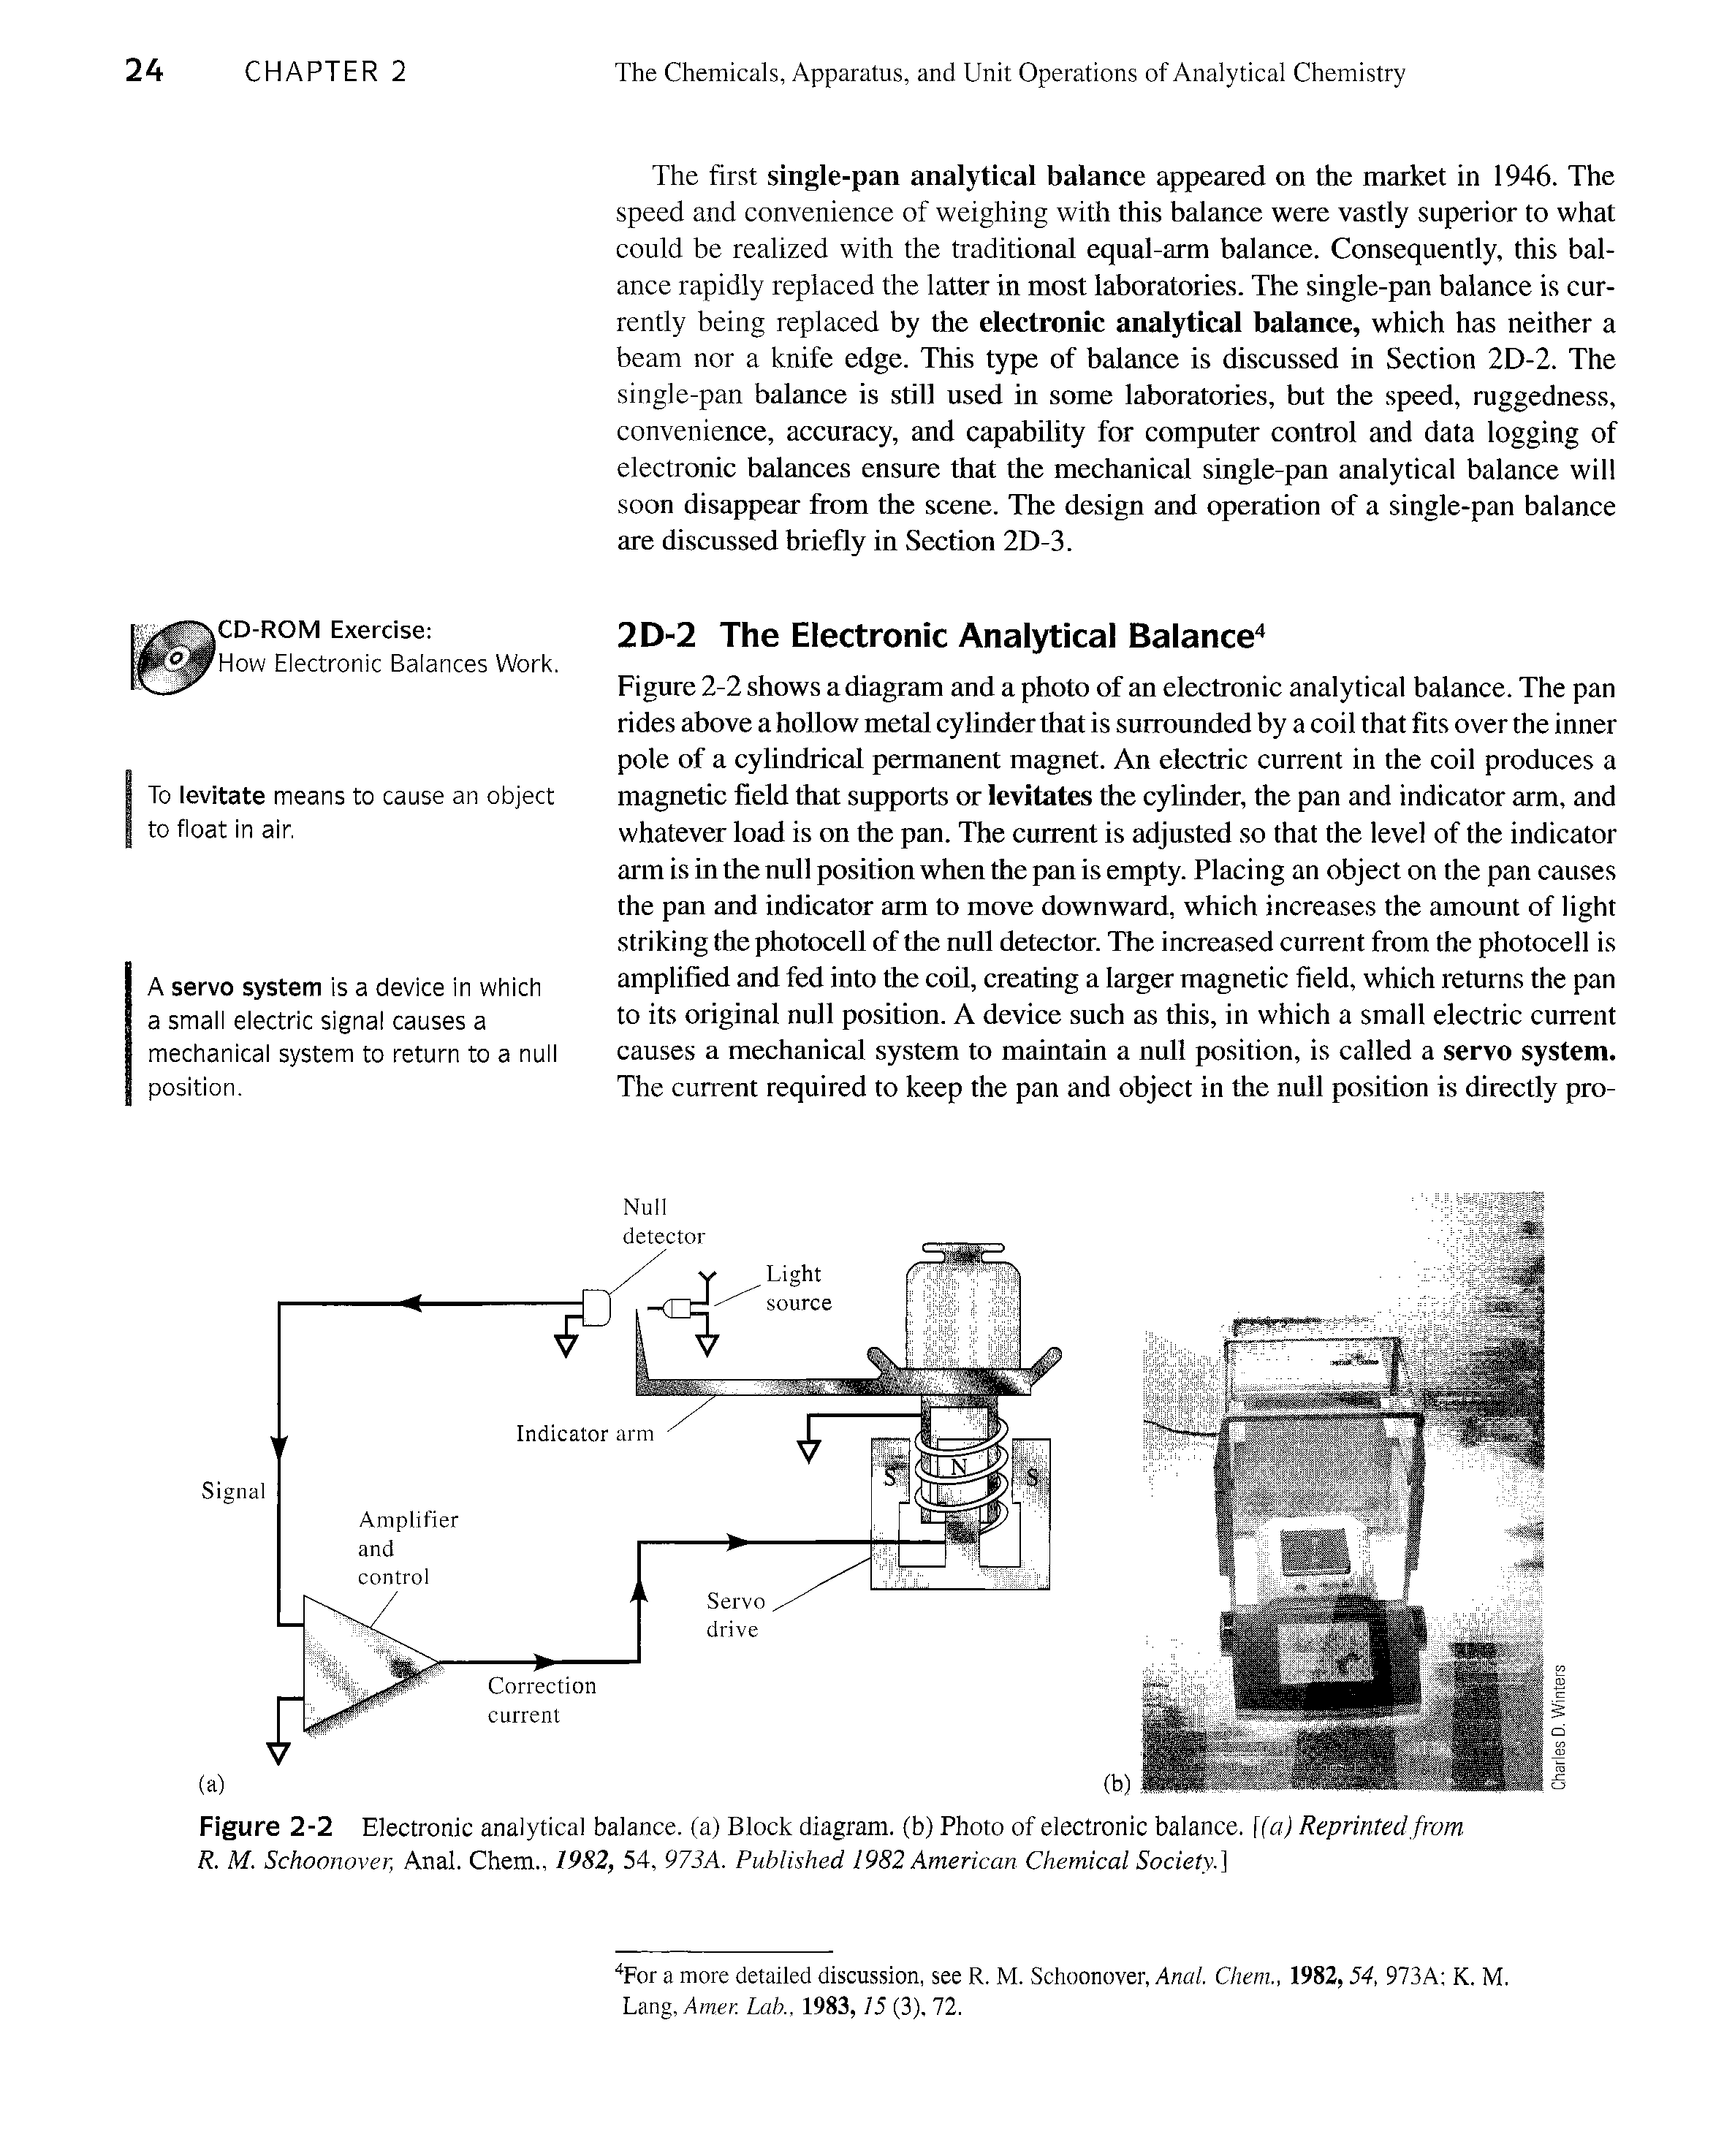 Figure 2-2 Electronic analytical balance, (a) Block diagram, (b) Photo of electronic balance. 1(a) Reprinted from. R. M. Schoonover, Anal. Chem., 1982, 54, 973A. Published 1982 American Chemical Society. ...